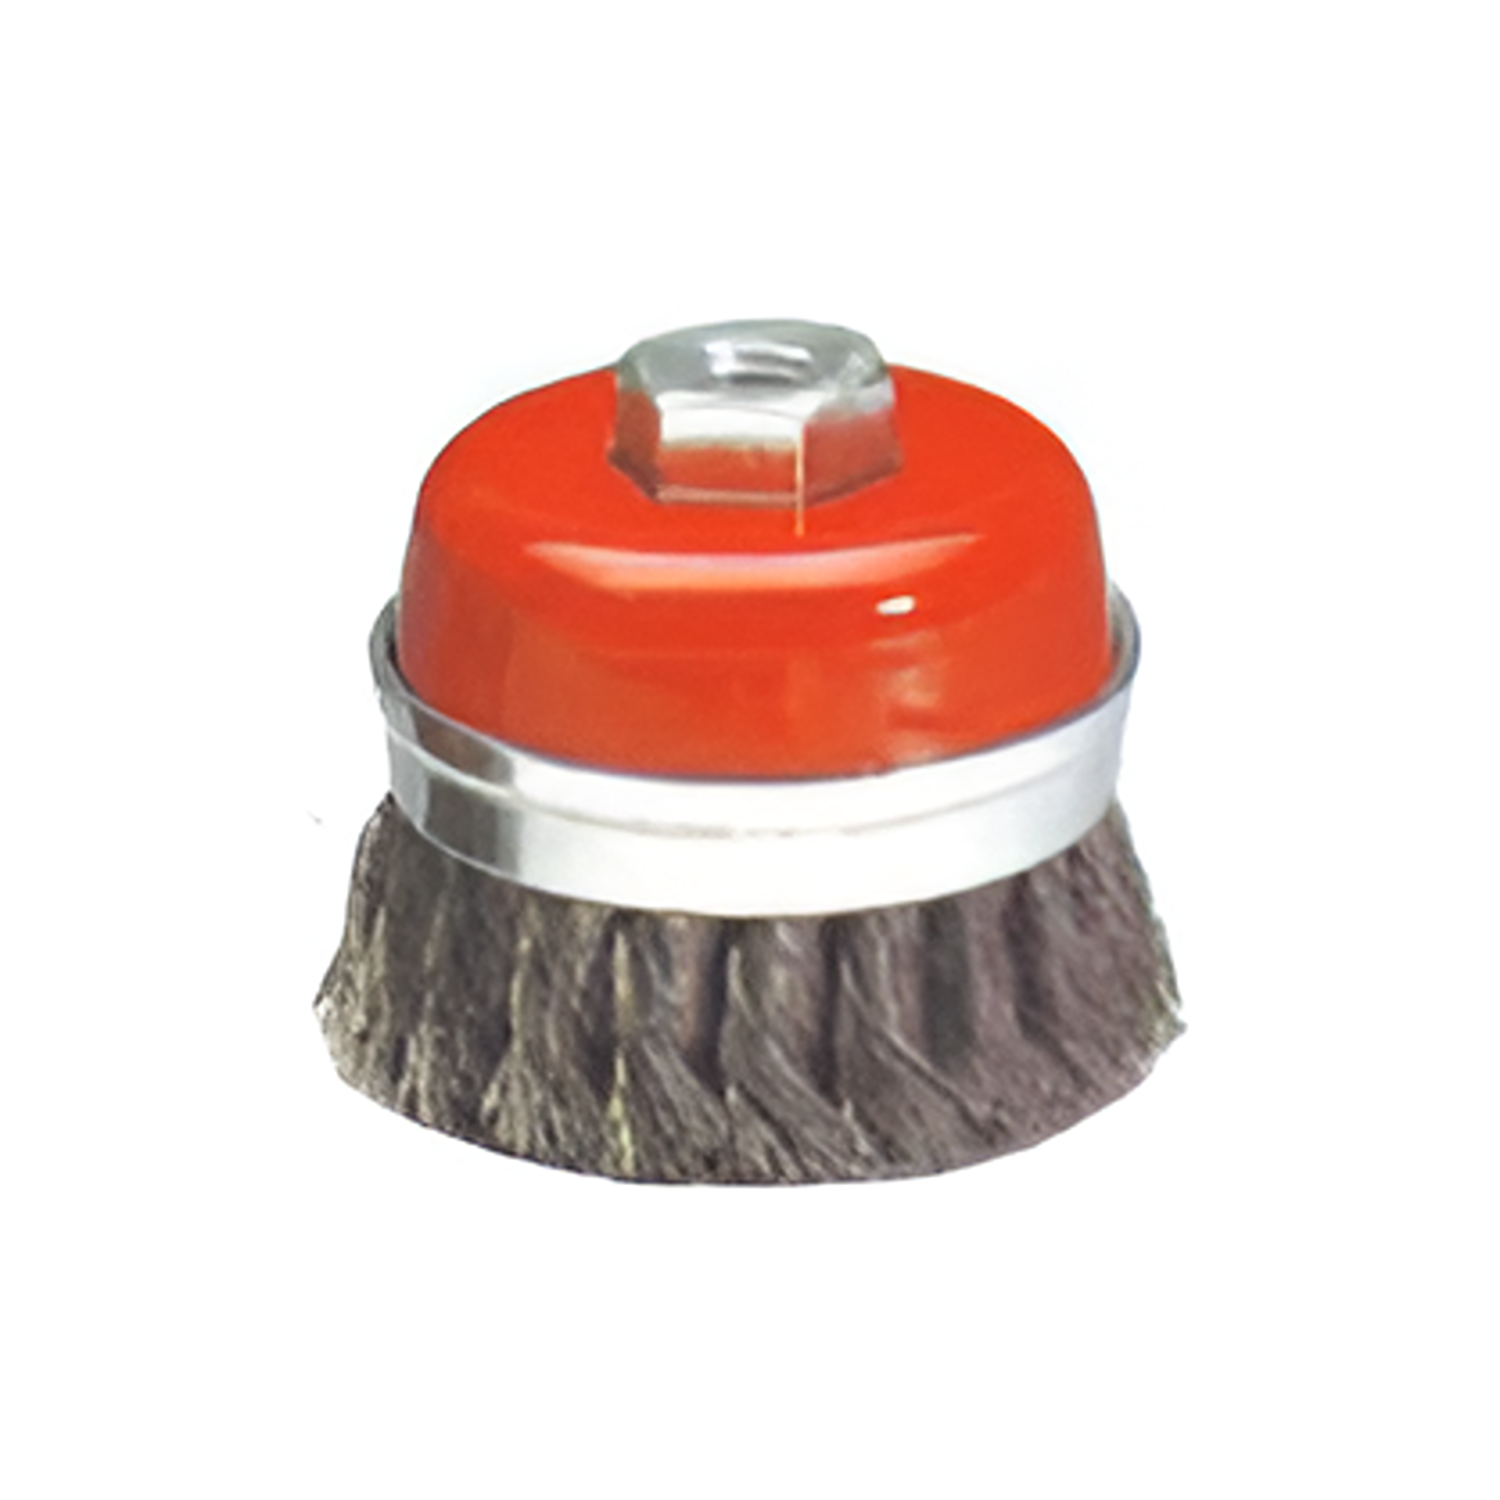 YEW AIK AE00214 NSK Twist Knot Cup Brush (For Electric Tool) - Premium Cup Brush from YEW AIK - Shop now at Yew Aik.